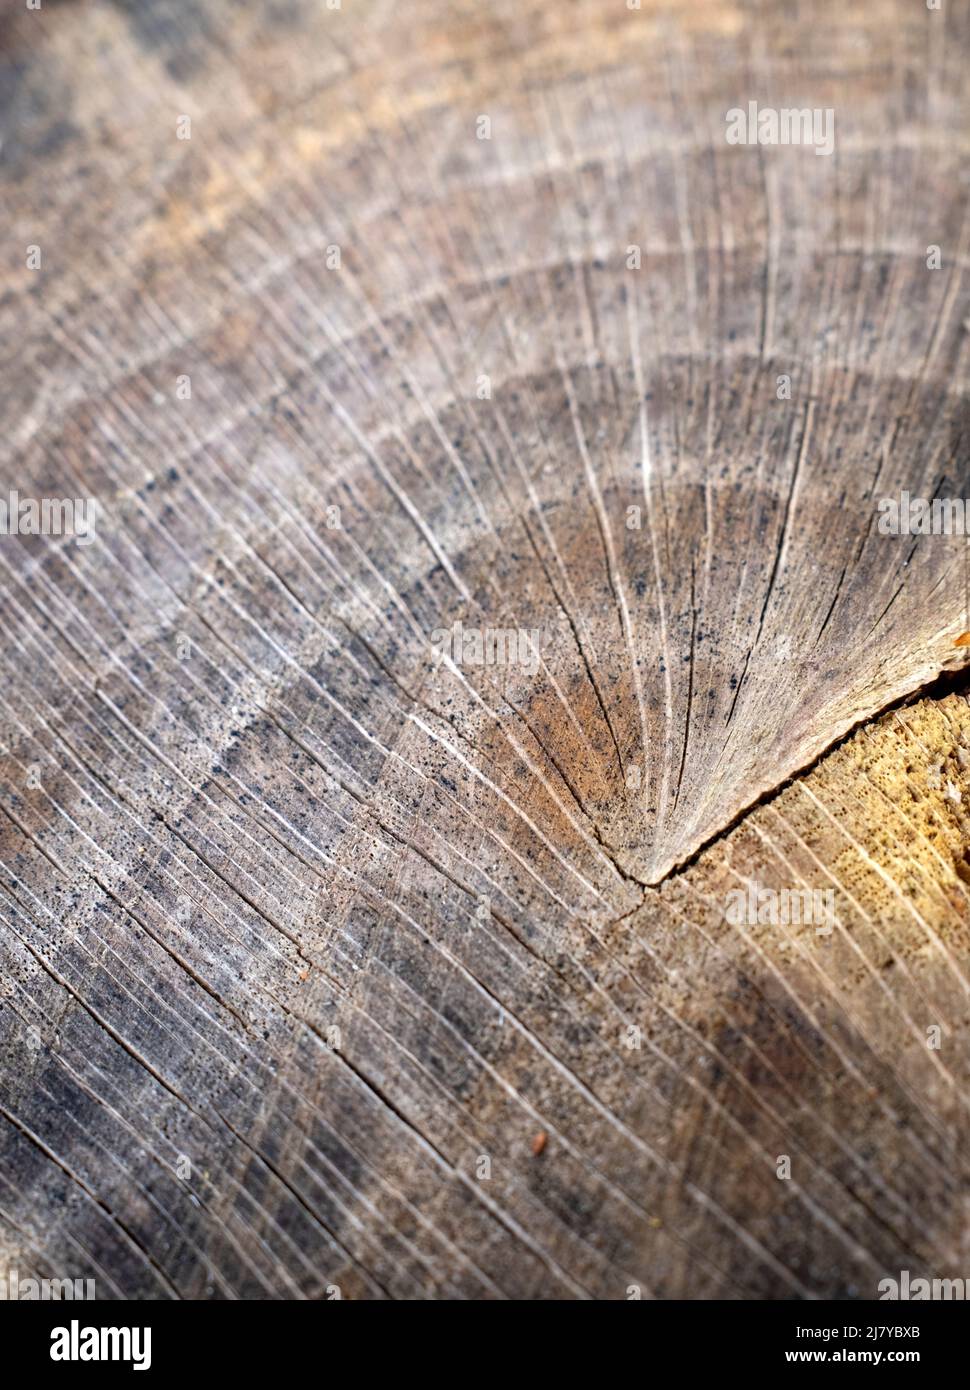 Timber cross-cut in close-up Stock Photo - Alamy